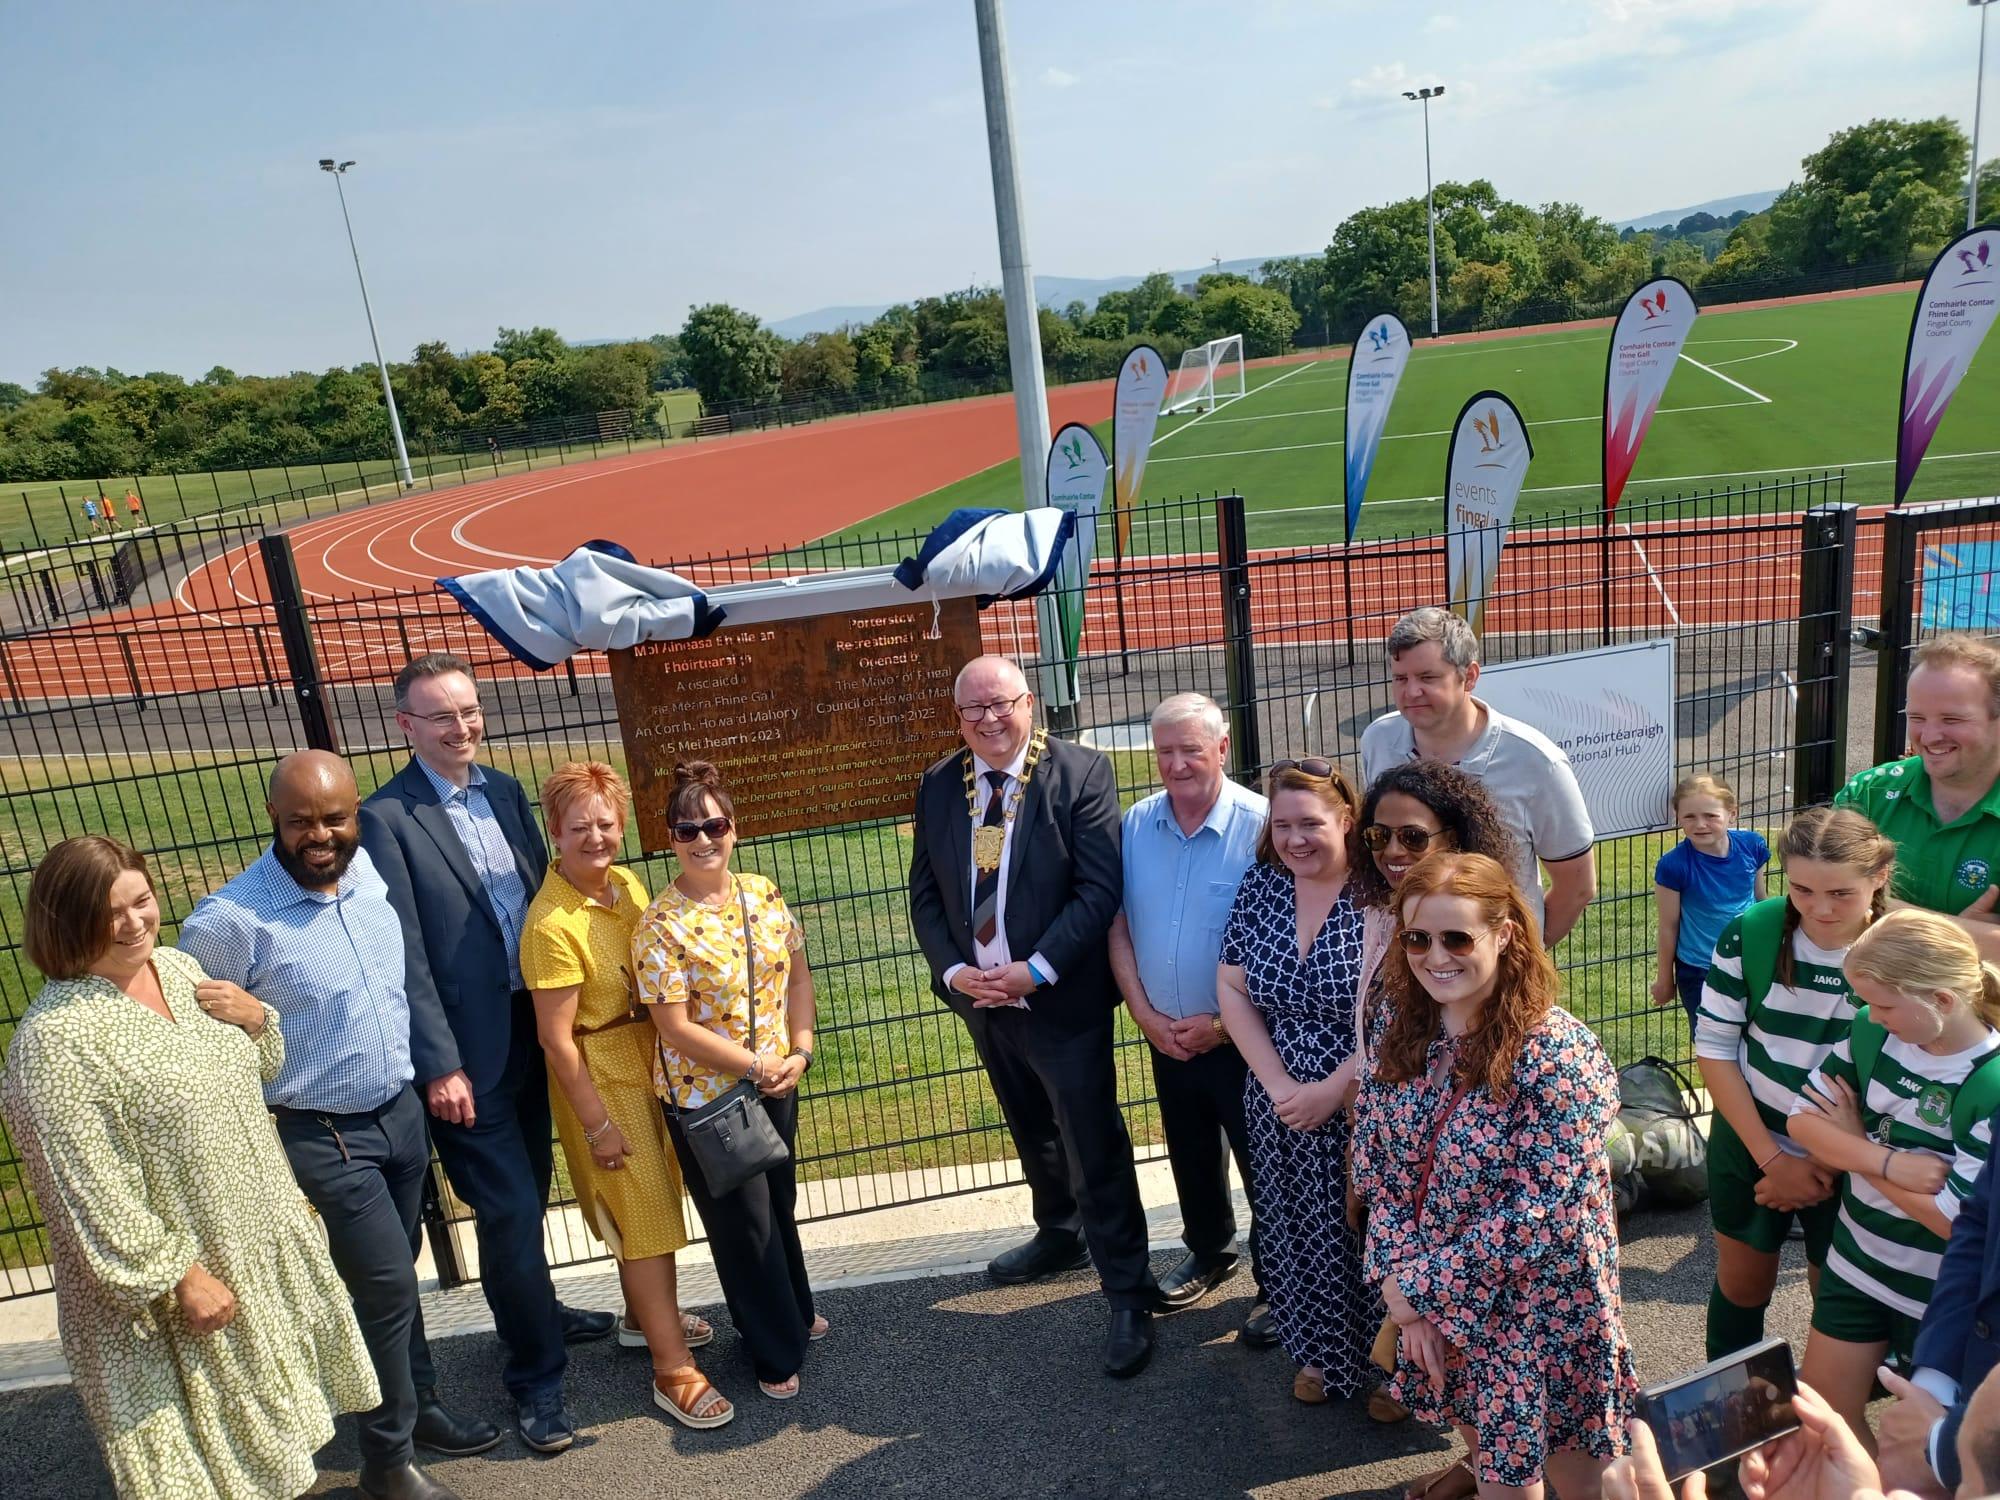 MAyor of Fingal Cllr Howard Mahony has officially opened the Porterstown Recreational Hub